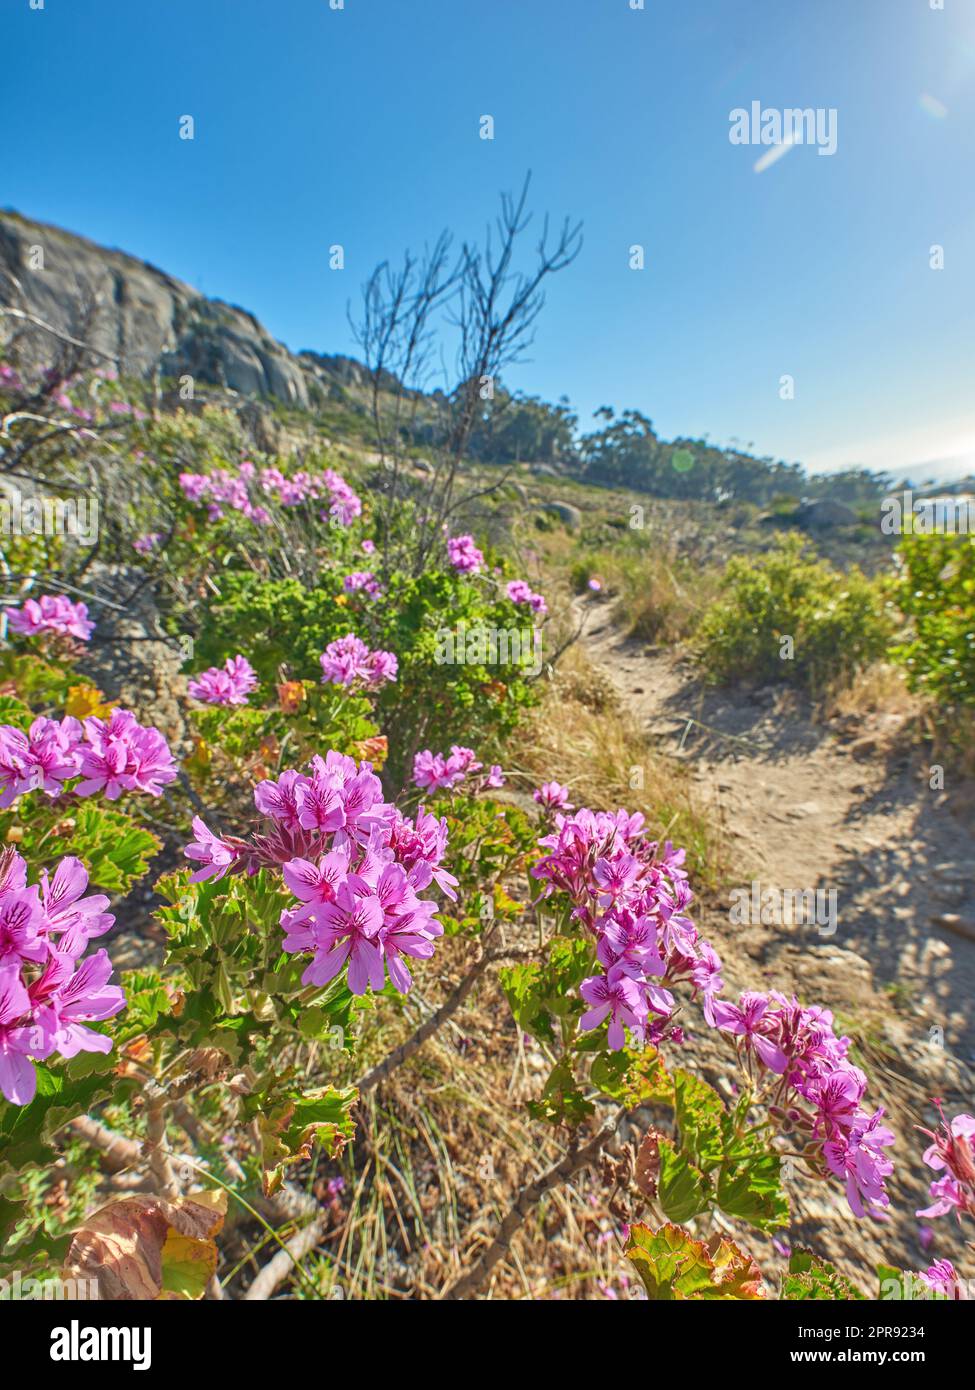 Narrow path on a mountain with colorful plants and trees in nature flourishing in their natural ecosystem in Cape Town. Pink flowers on green stems growing on a hill side on a sunny day with blue sky Stock Photo